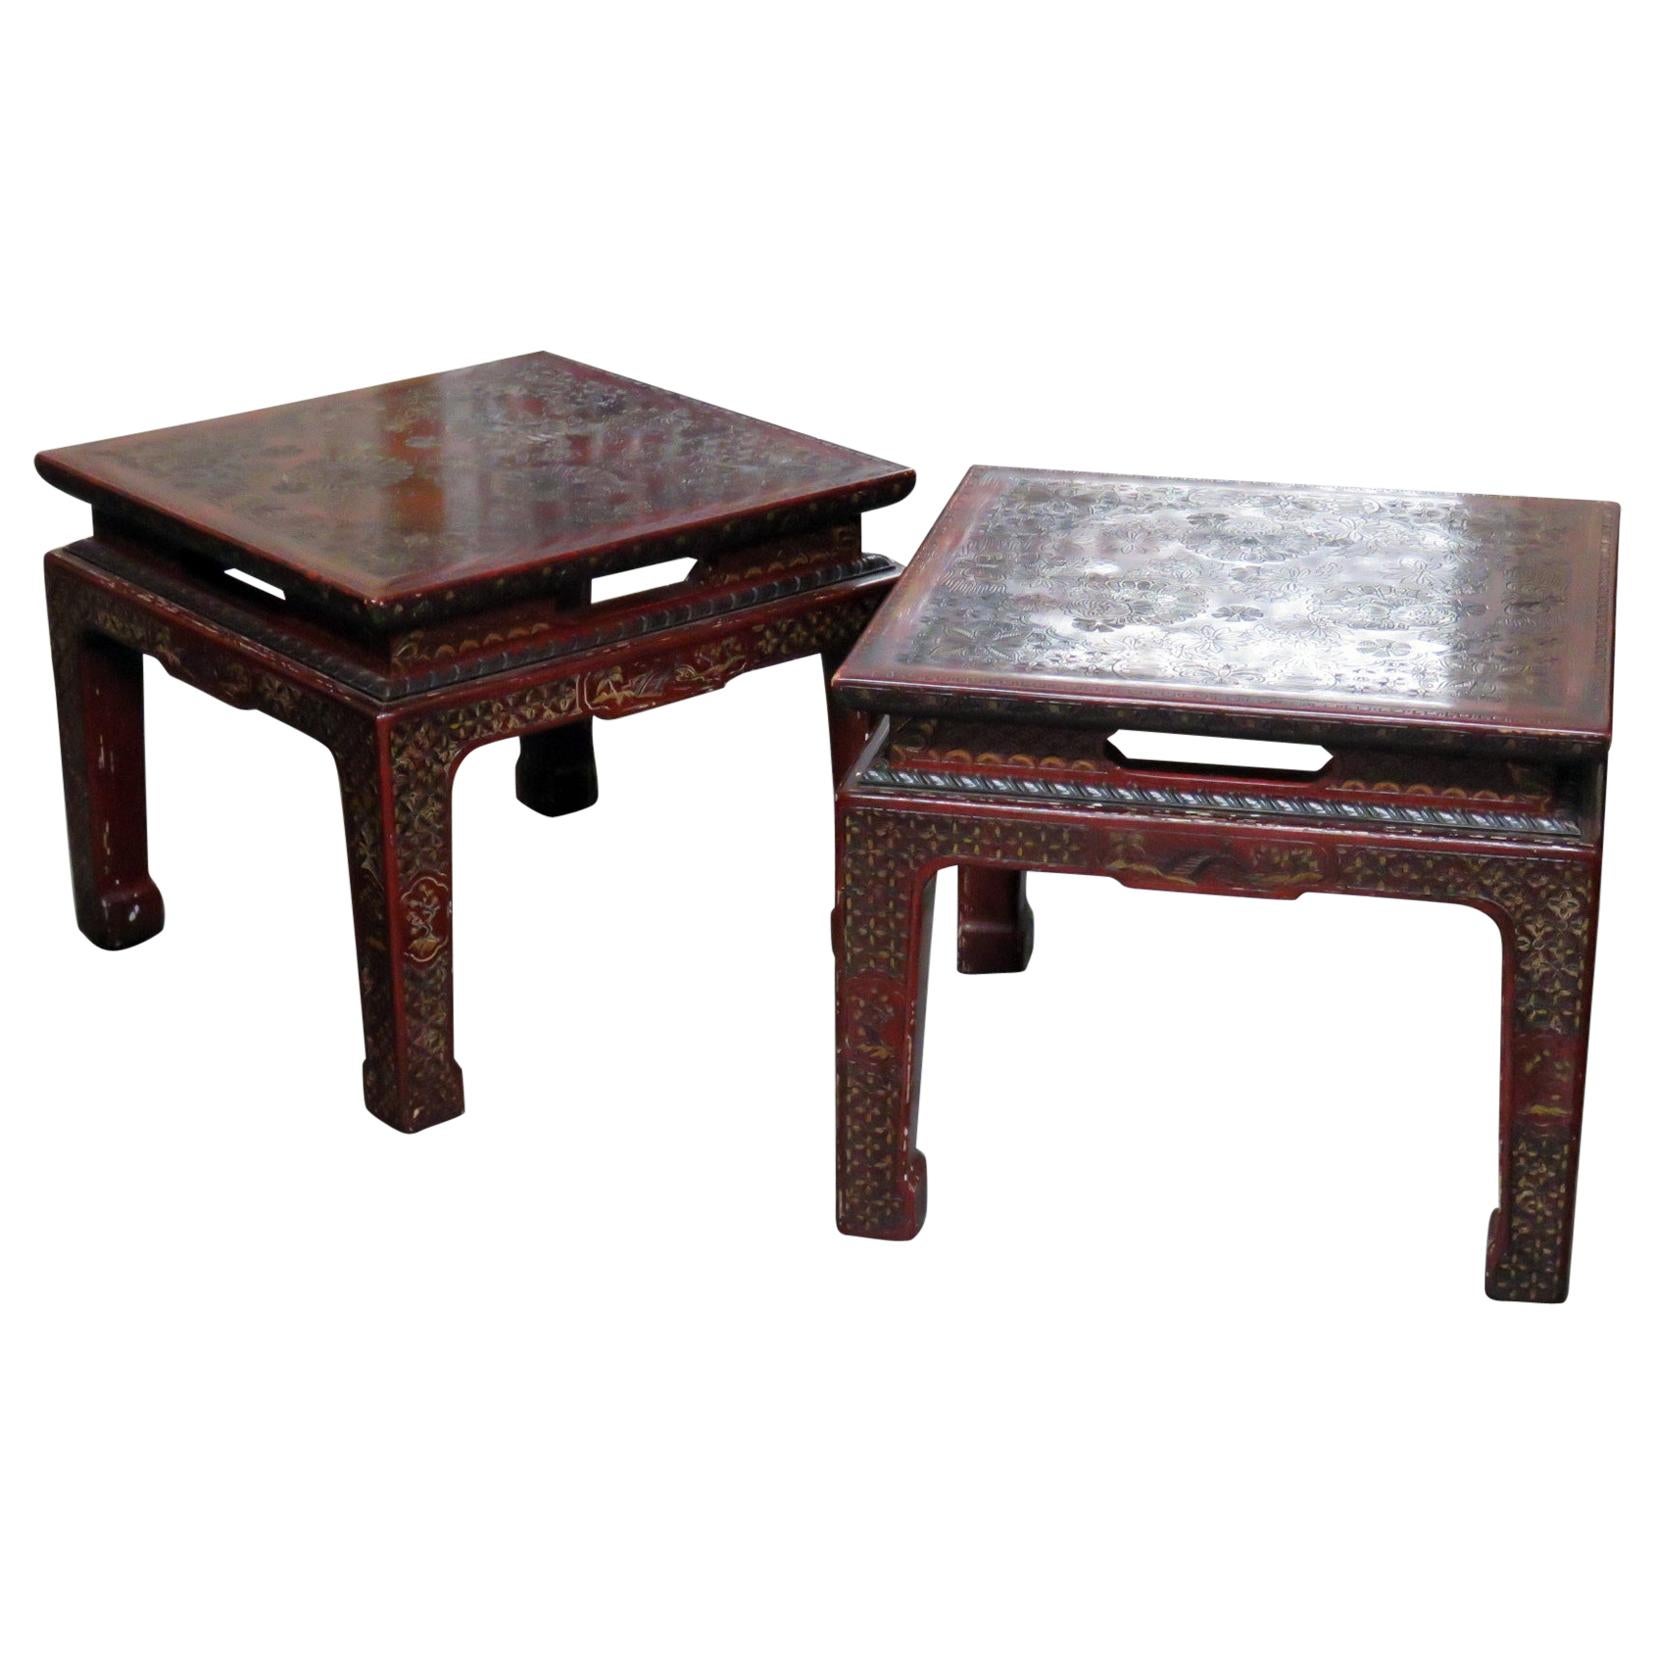 Pair of John Widdicomb Coromandel Lacquer Carved Chinoiserie End Side Tables